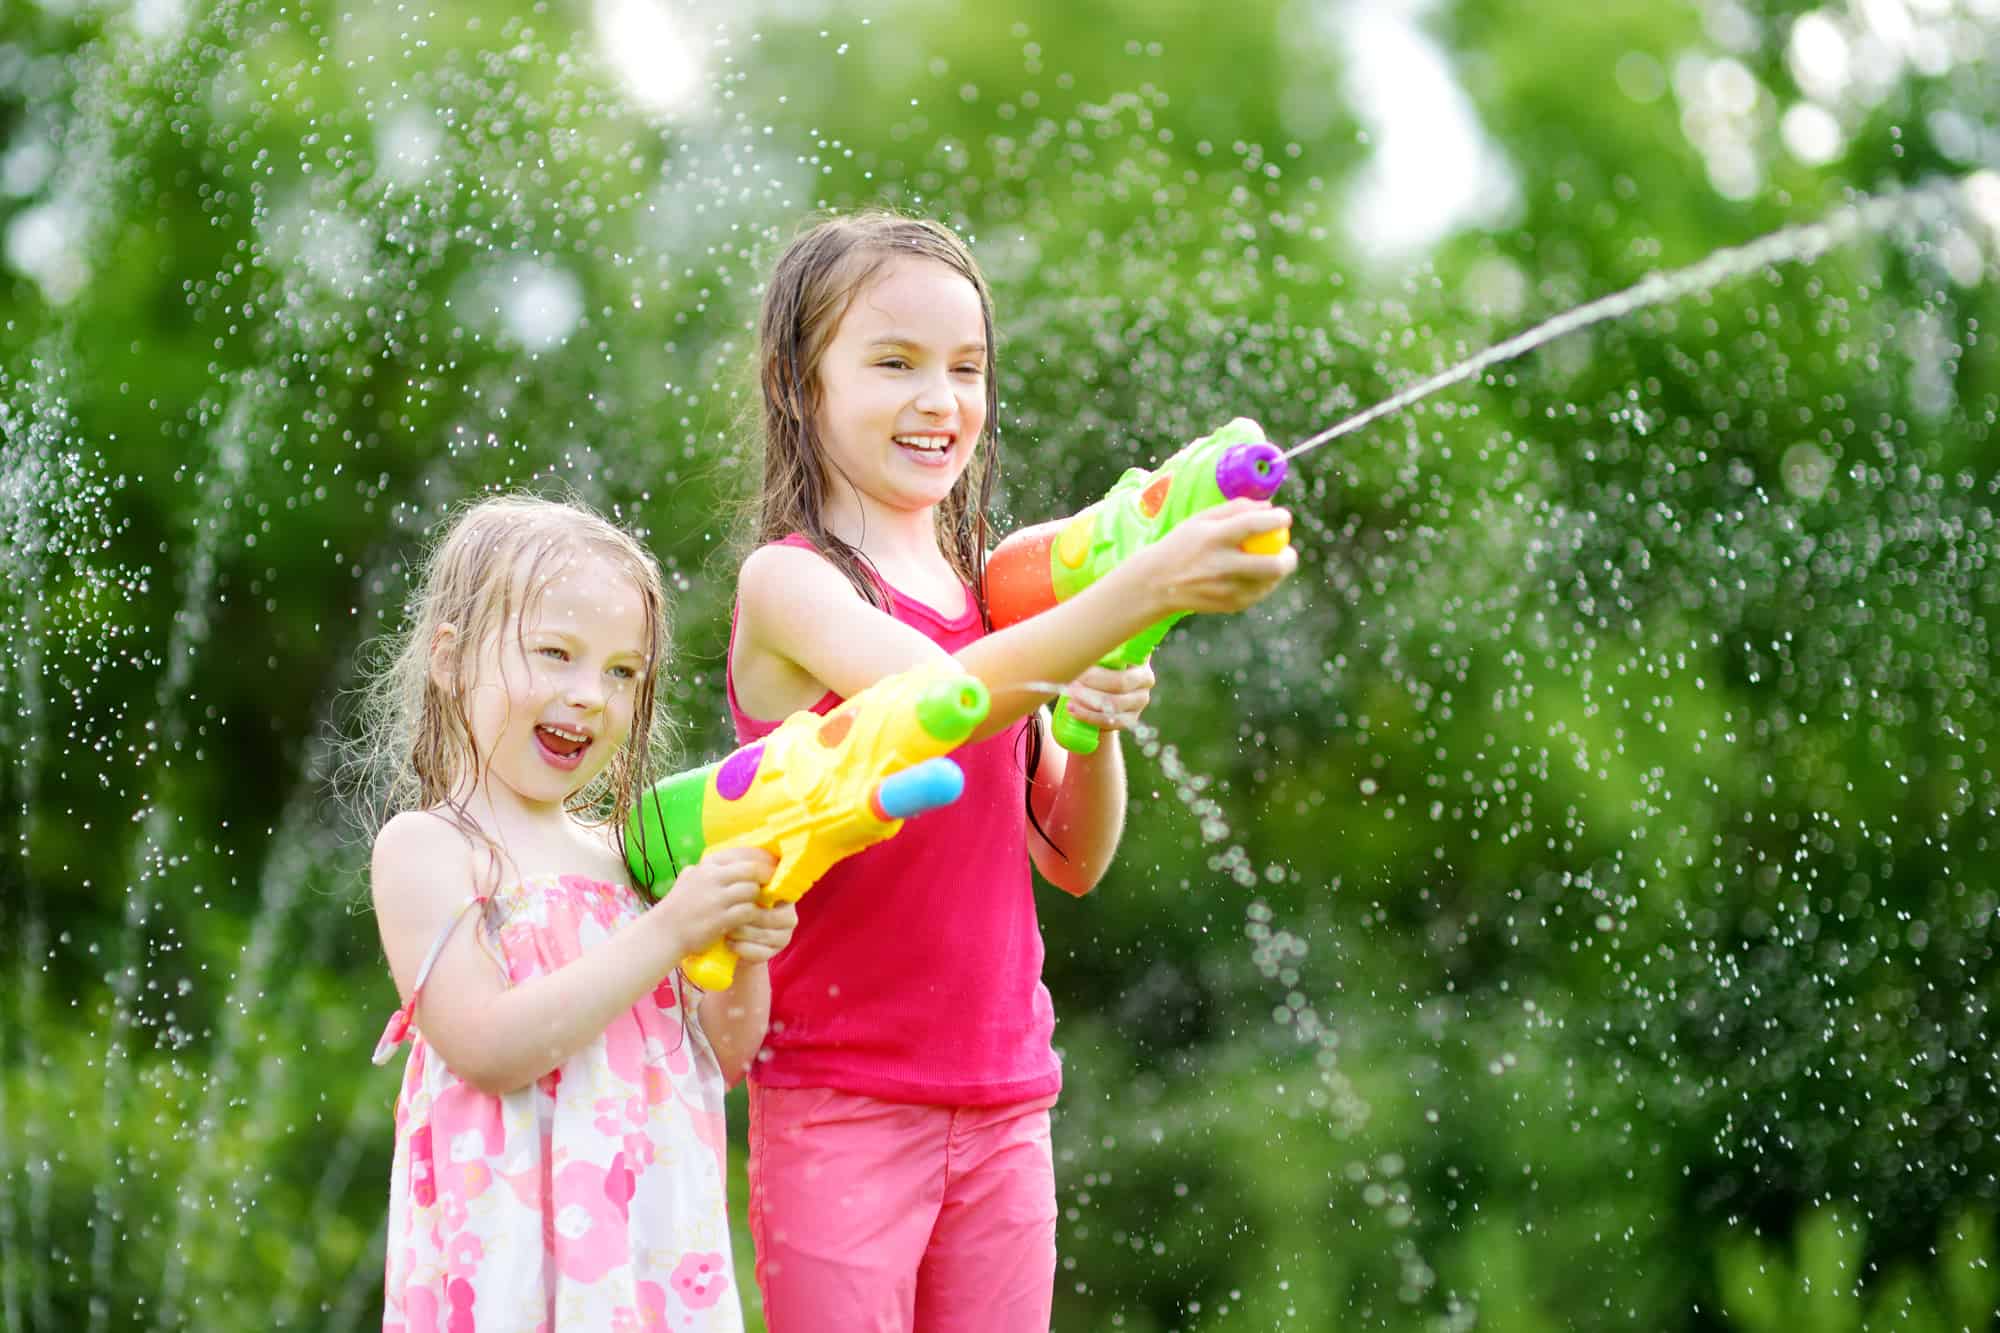 Who Made a Splash with the Water Gun?